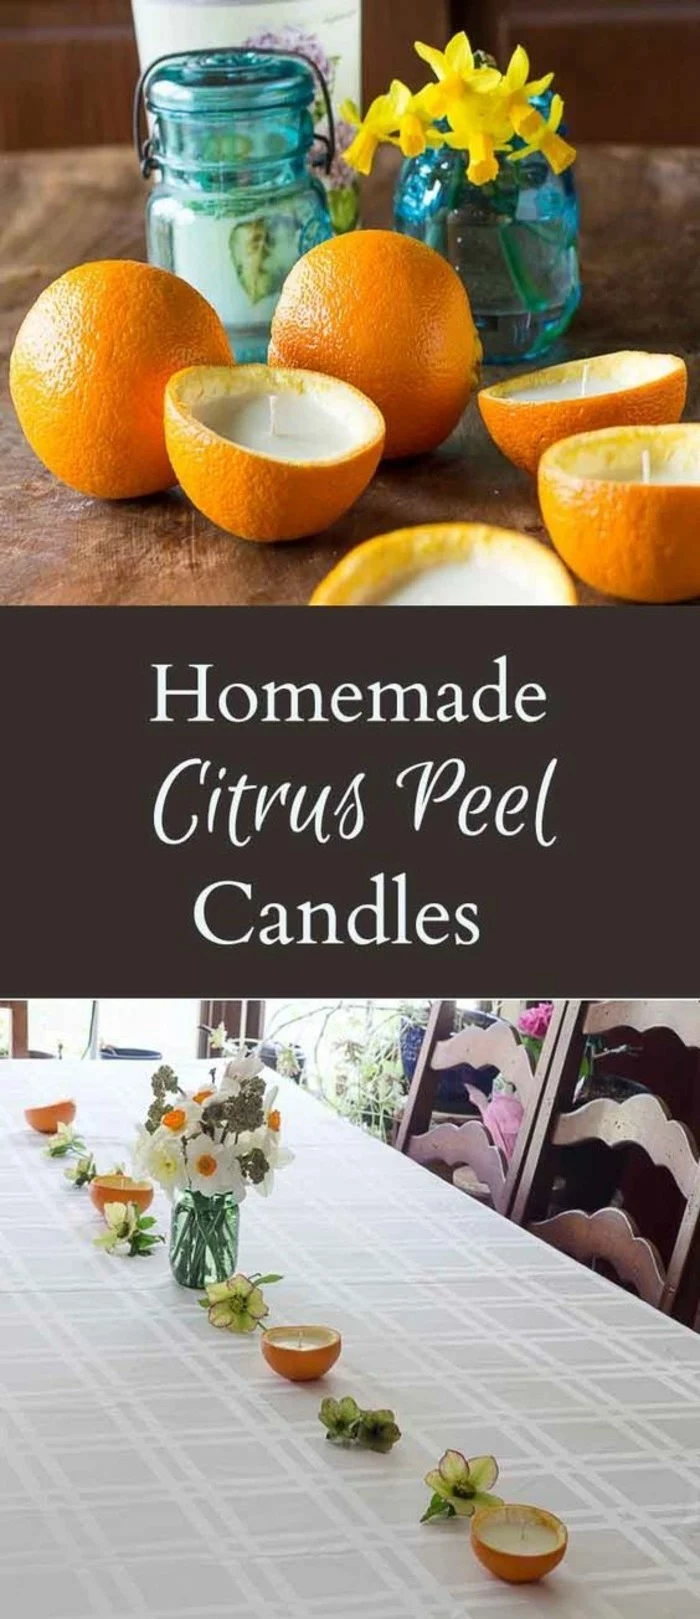 homemade citrus peel candles, sliced oranges in half, how to make scented candles, filled with candle waax